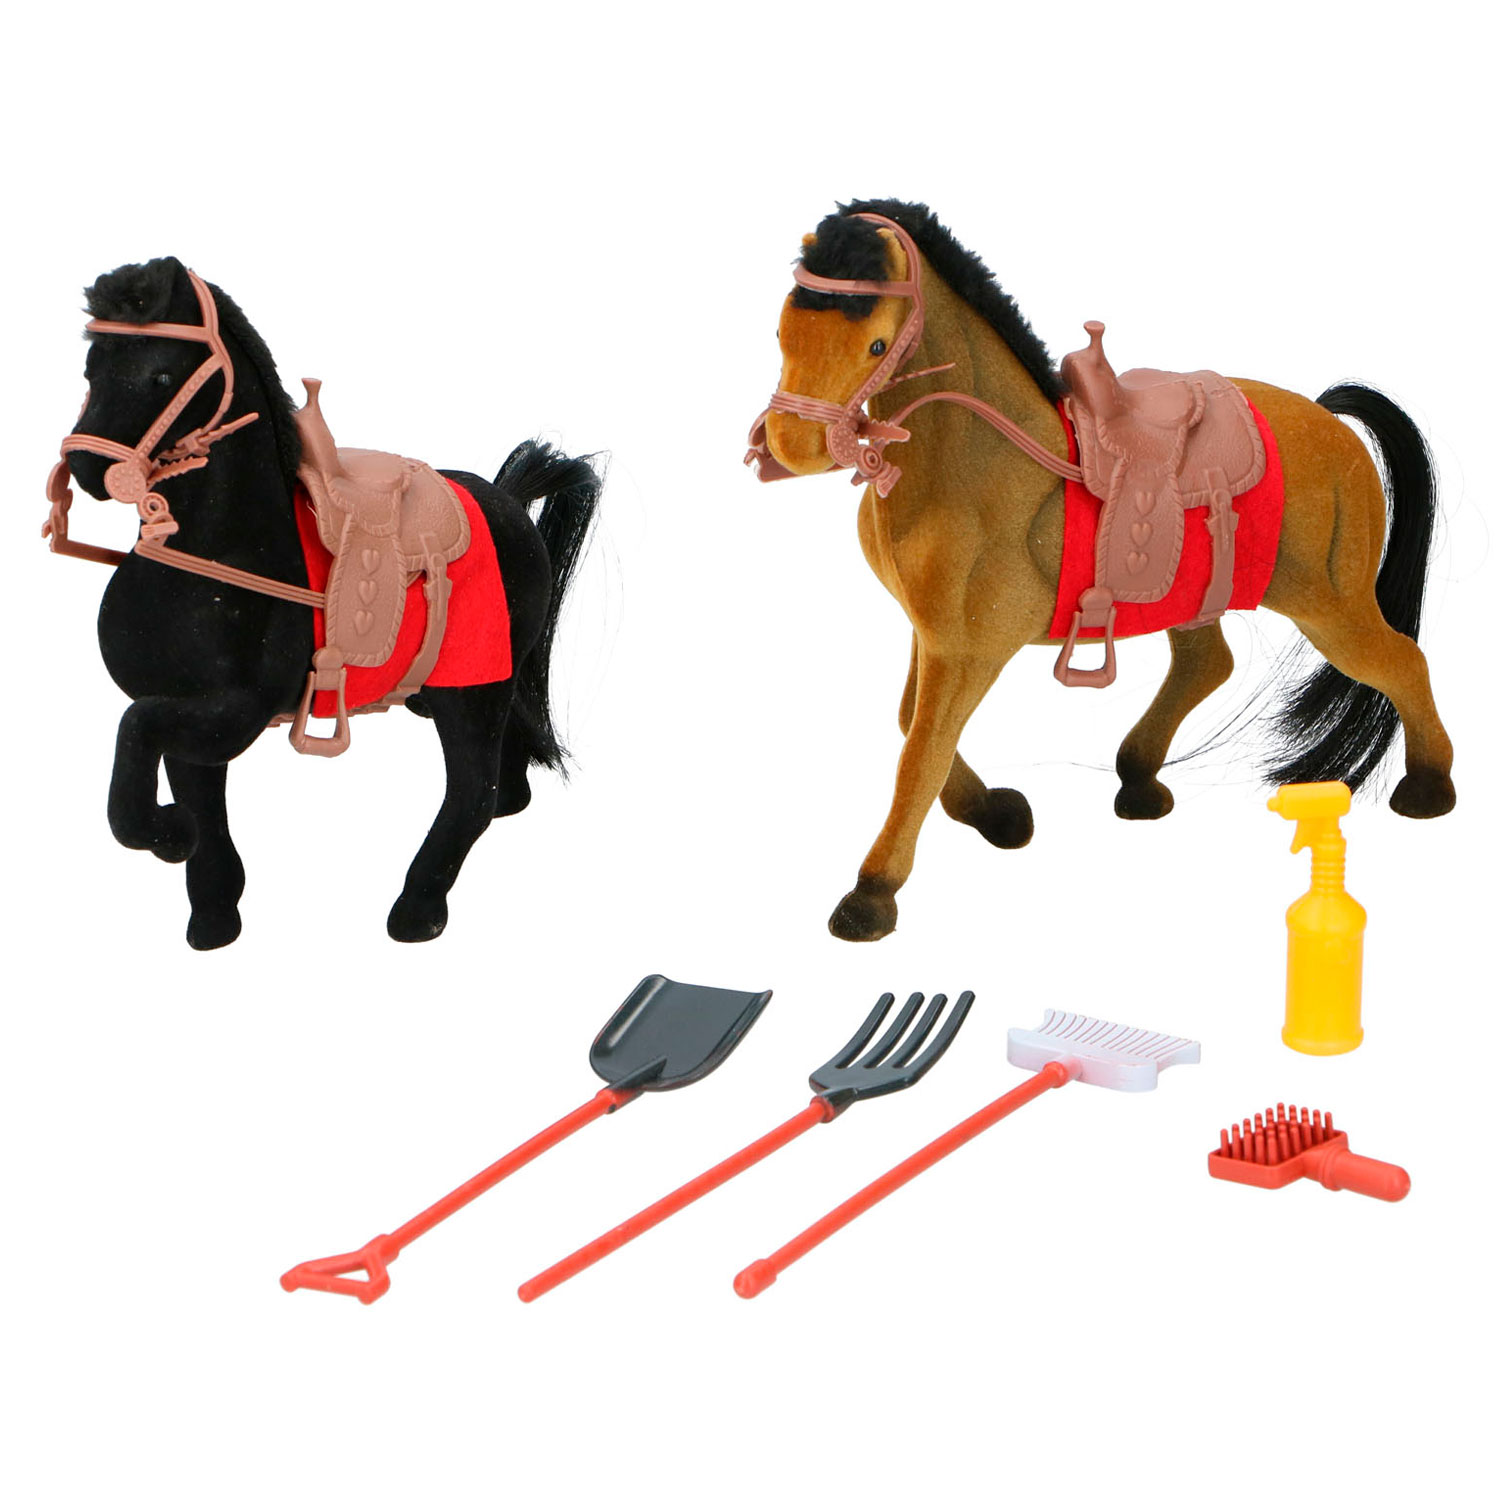 spanning Dwang Voorstel Paarden Speelset, 7dlg. | Thimble Toys